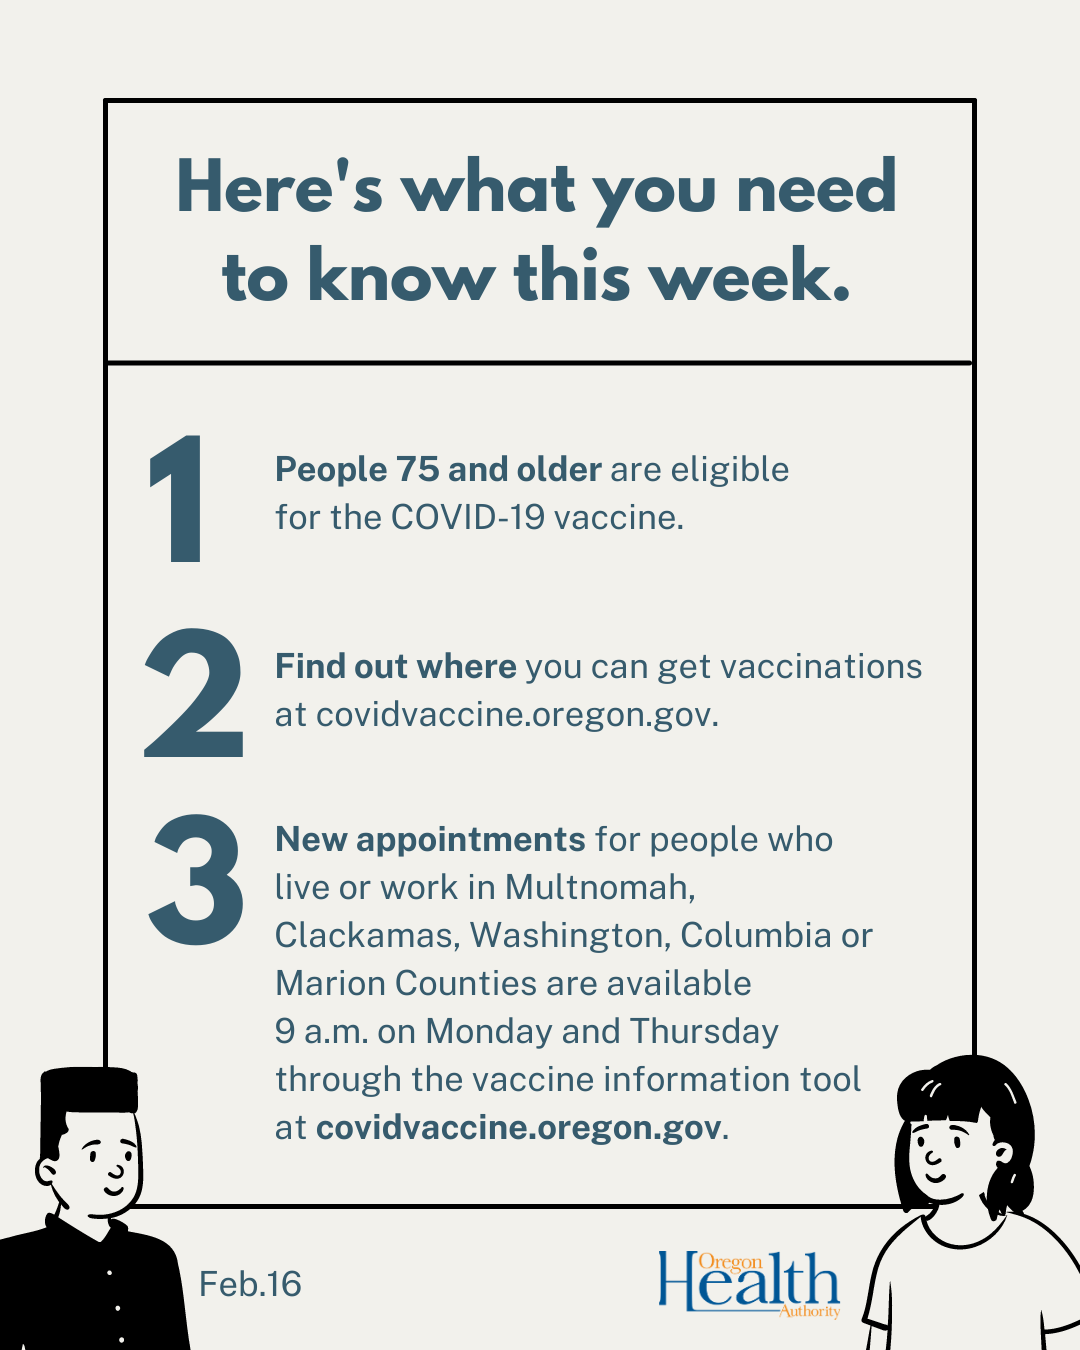 75+ are eligible for vaccine, find out where to get vaccinations at covidvaccine.oregon.gov, new appointments available at 9 am Mon. and Thurs.